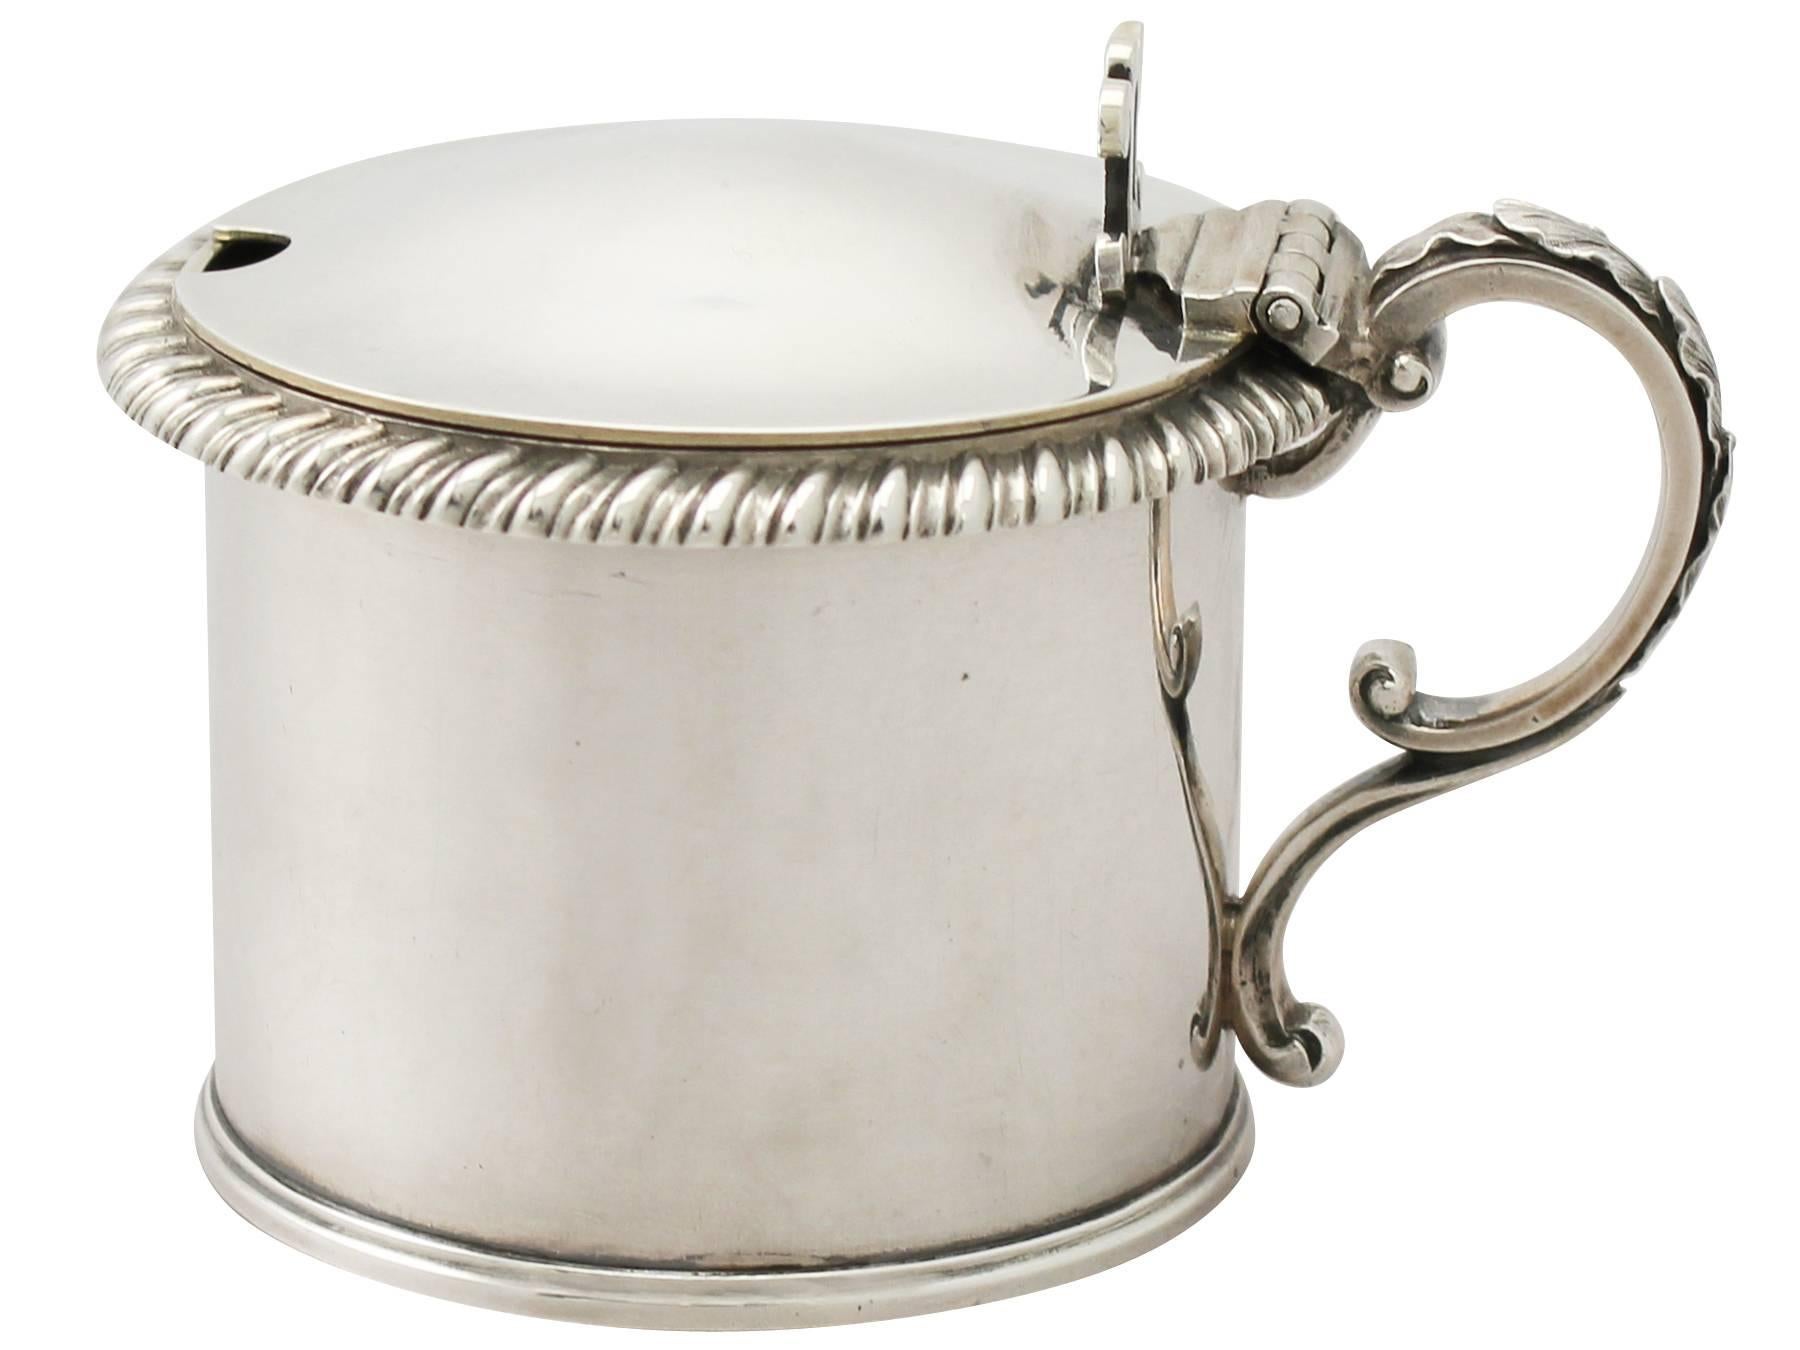 A very fine antique William IV English sterling silver drum mustard pot; an addition to our silver condiment collection.

This impressive antique William IV solid silver mustard pot has a plain drum shaped form.

The sterling silver body of the